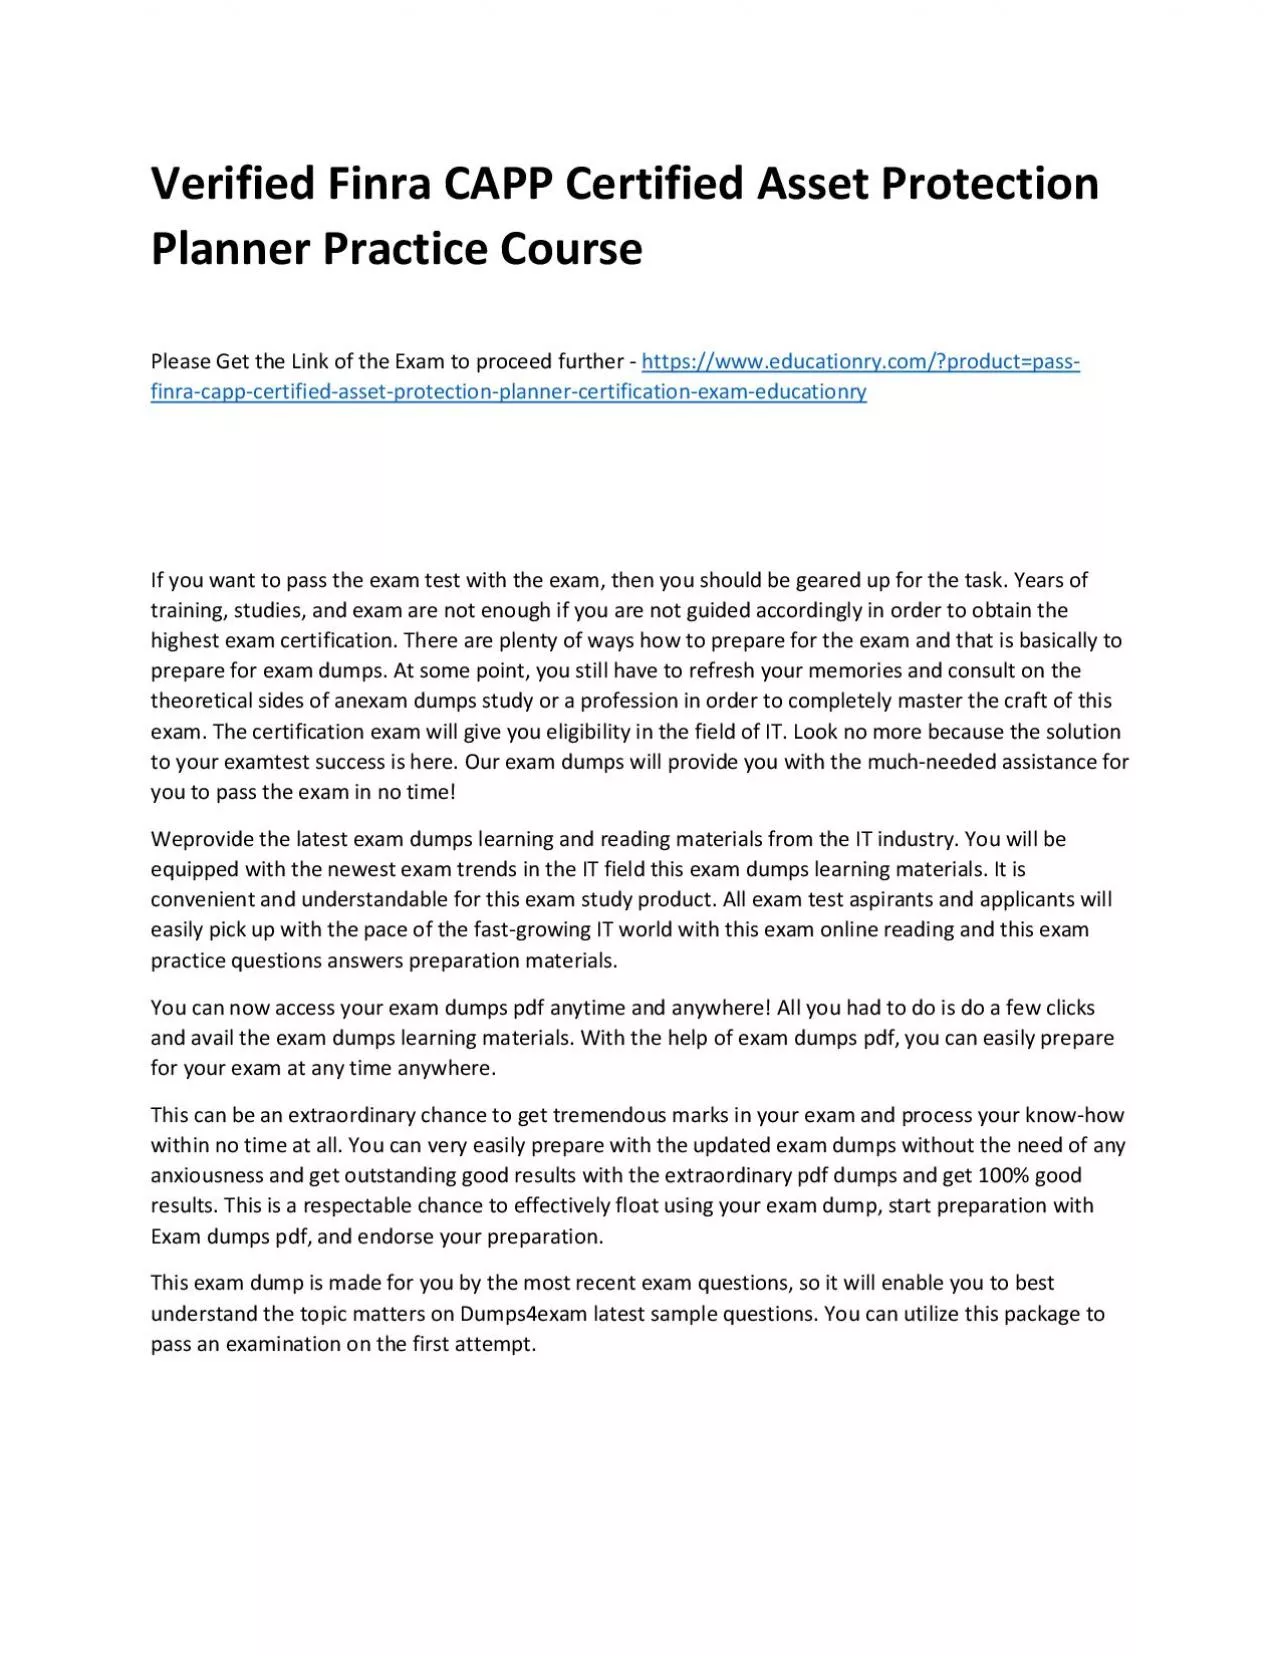 Finra CAPP Certified Asset Protection Planner